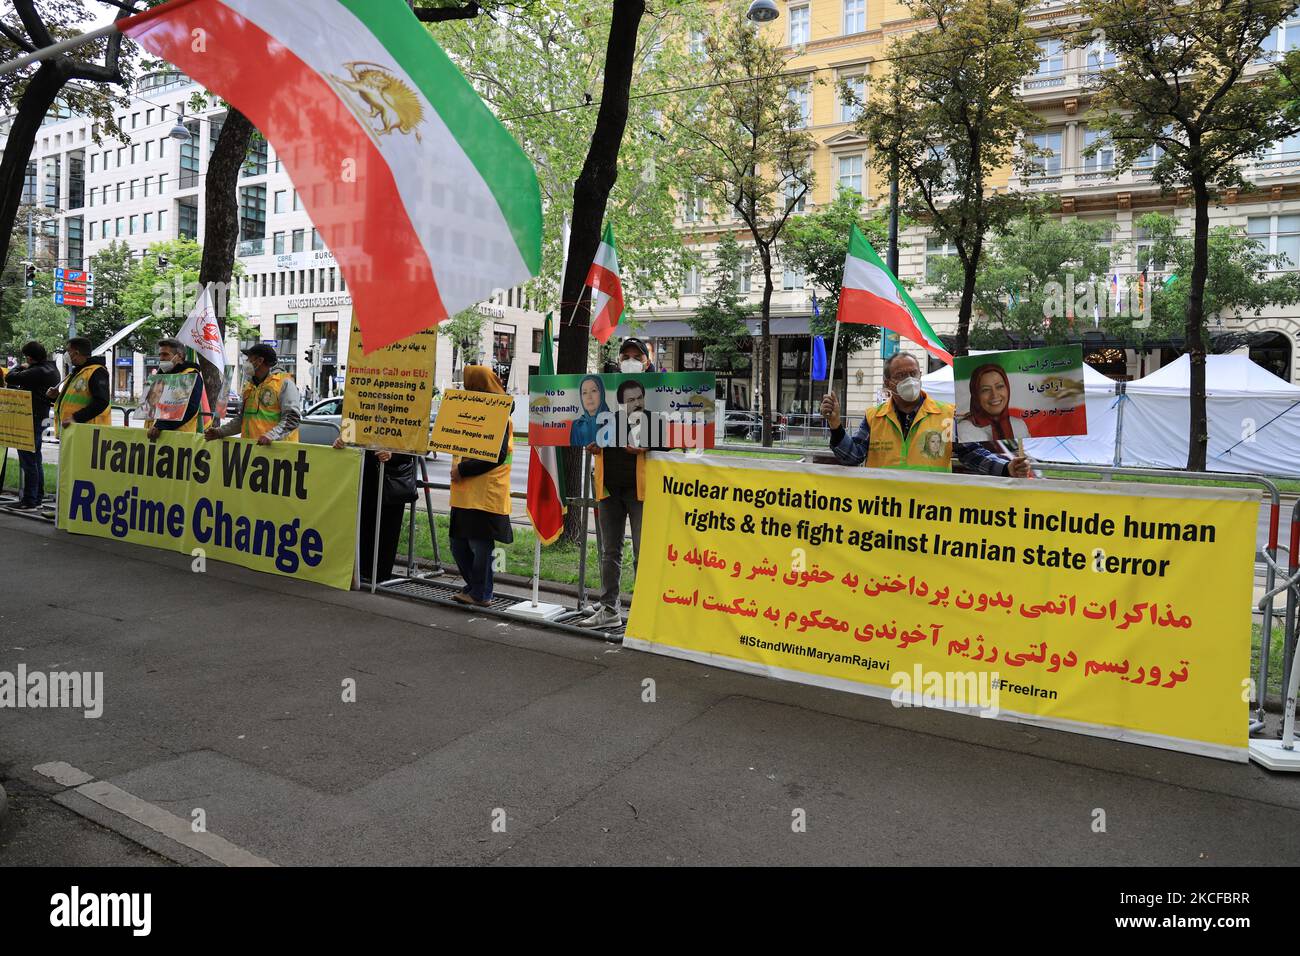 Simultaneous with the Iran Nuclear talks in Vienna, supporters of the Iranian opposition (NCRI), held a rally outside the Grand Hotel on Friday, May 28, 2021 in Vienna, Austria. The protesters called the world community to end appeasing the Iran regime, hold its leaders accountable for violating human rights and spending the Iranian people's wealth on the nuclear weapons program. (Photo by Siavosh Hosseini/NurPhoto) Stock Photo